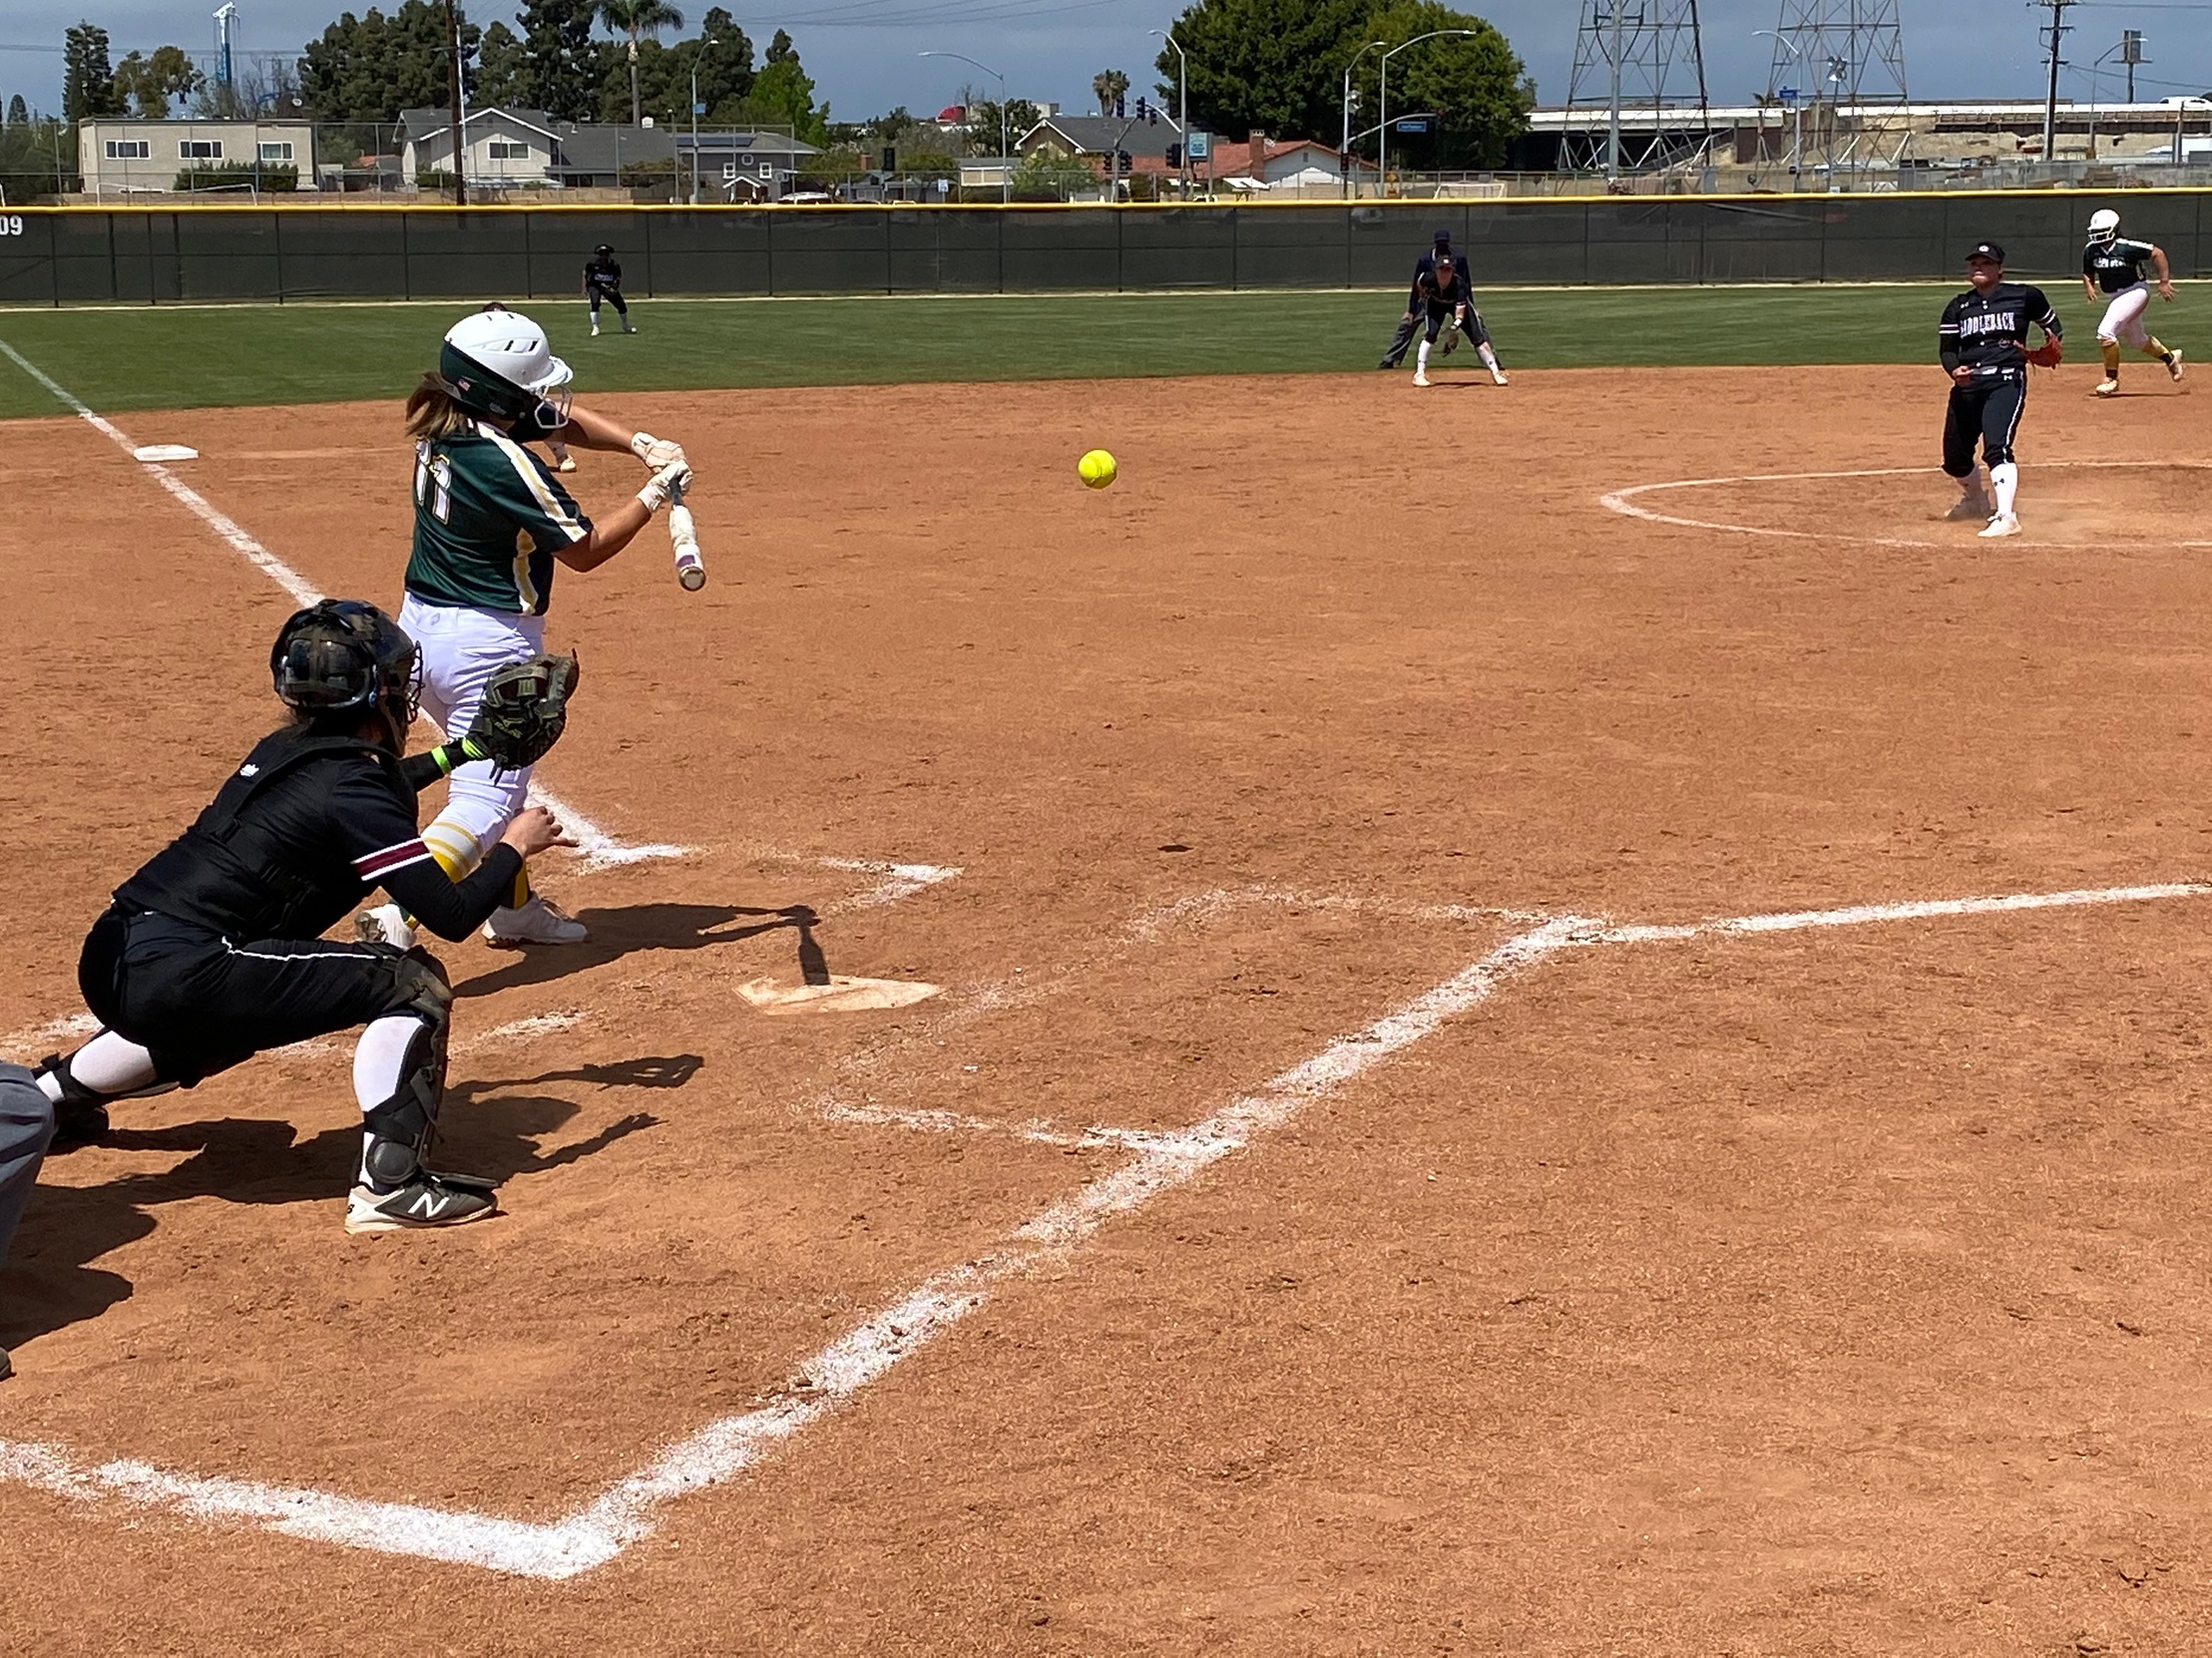 Softball: Offense Continues to Struggle in Doubleheader Sweep